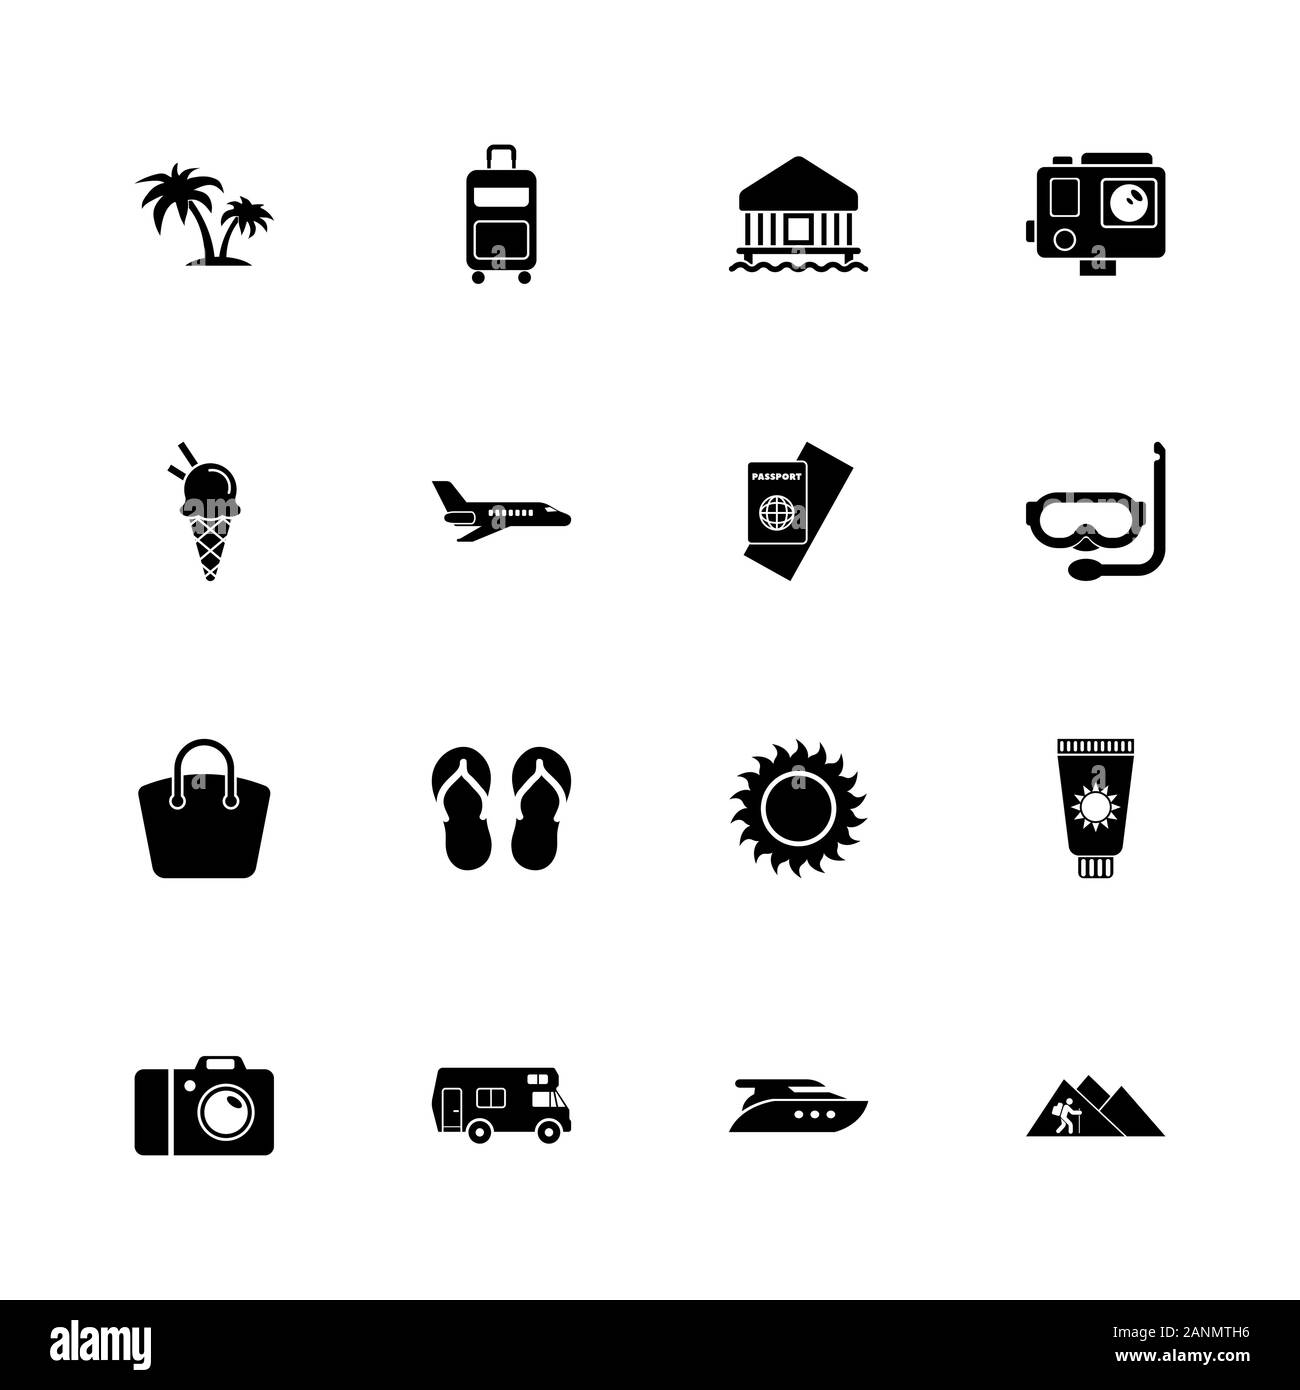 Tourism icons - Expand to any size - Change to any colour. Flat Vector Icons - Black Illustration on White Background. Stock Vector